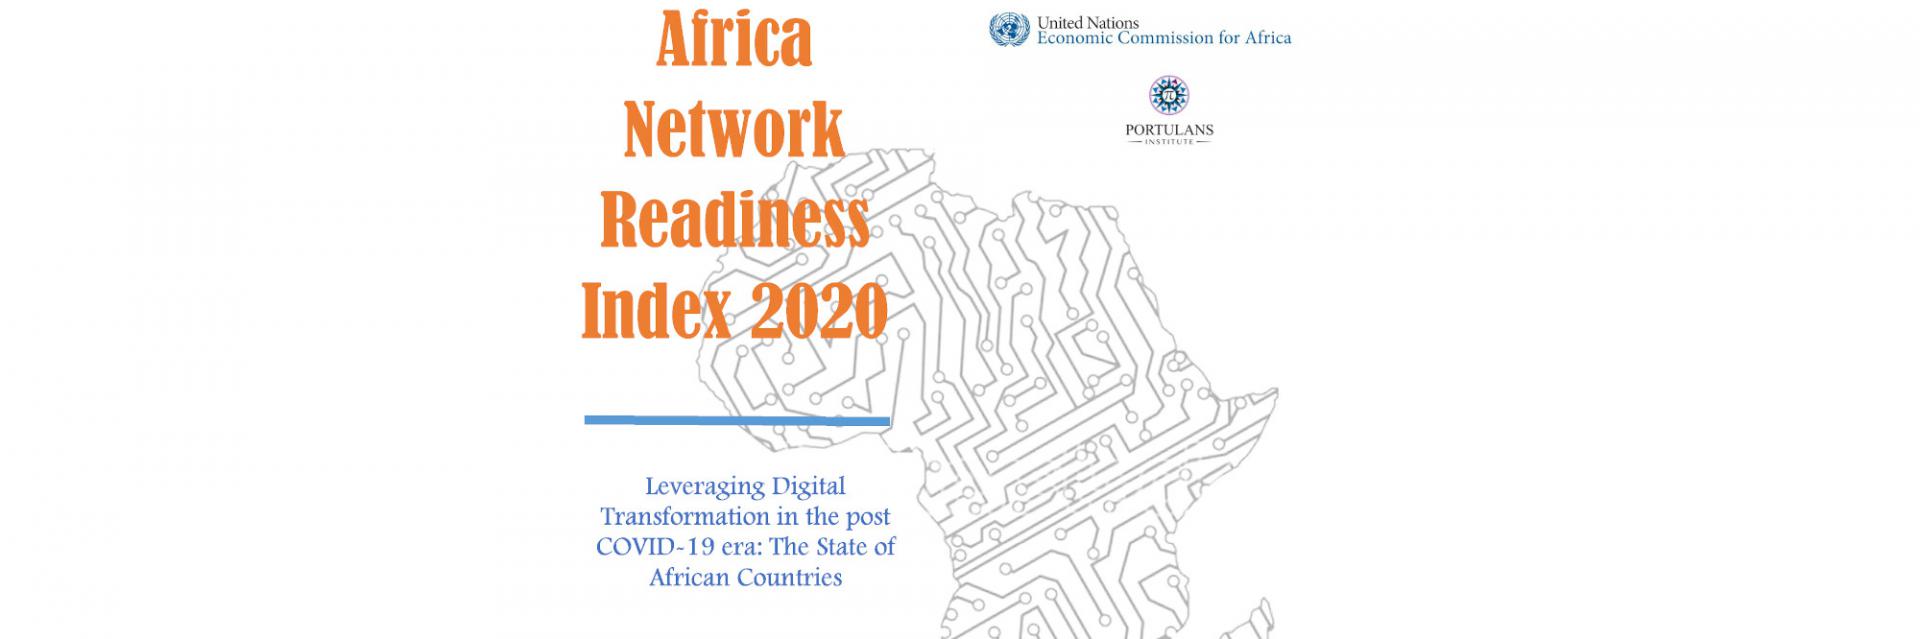 Digital Transformation in a post-COVID world: Africa continues to trail other regions says new report